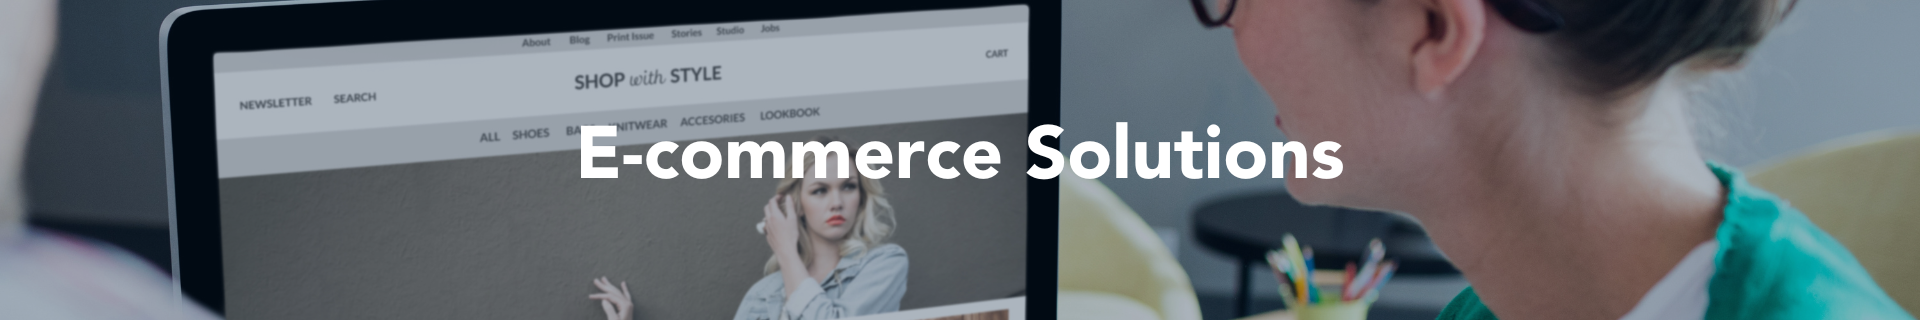 ecommerce solutions banner